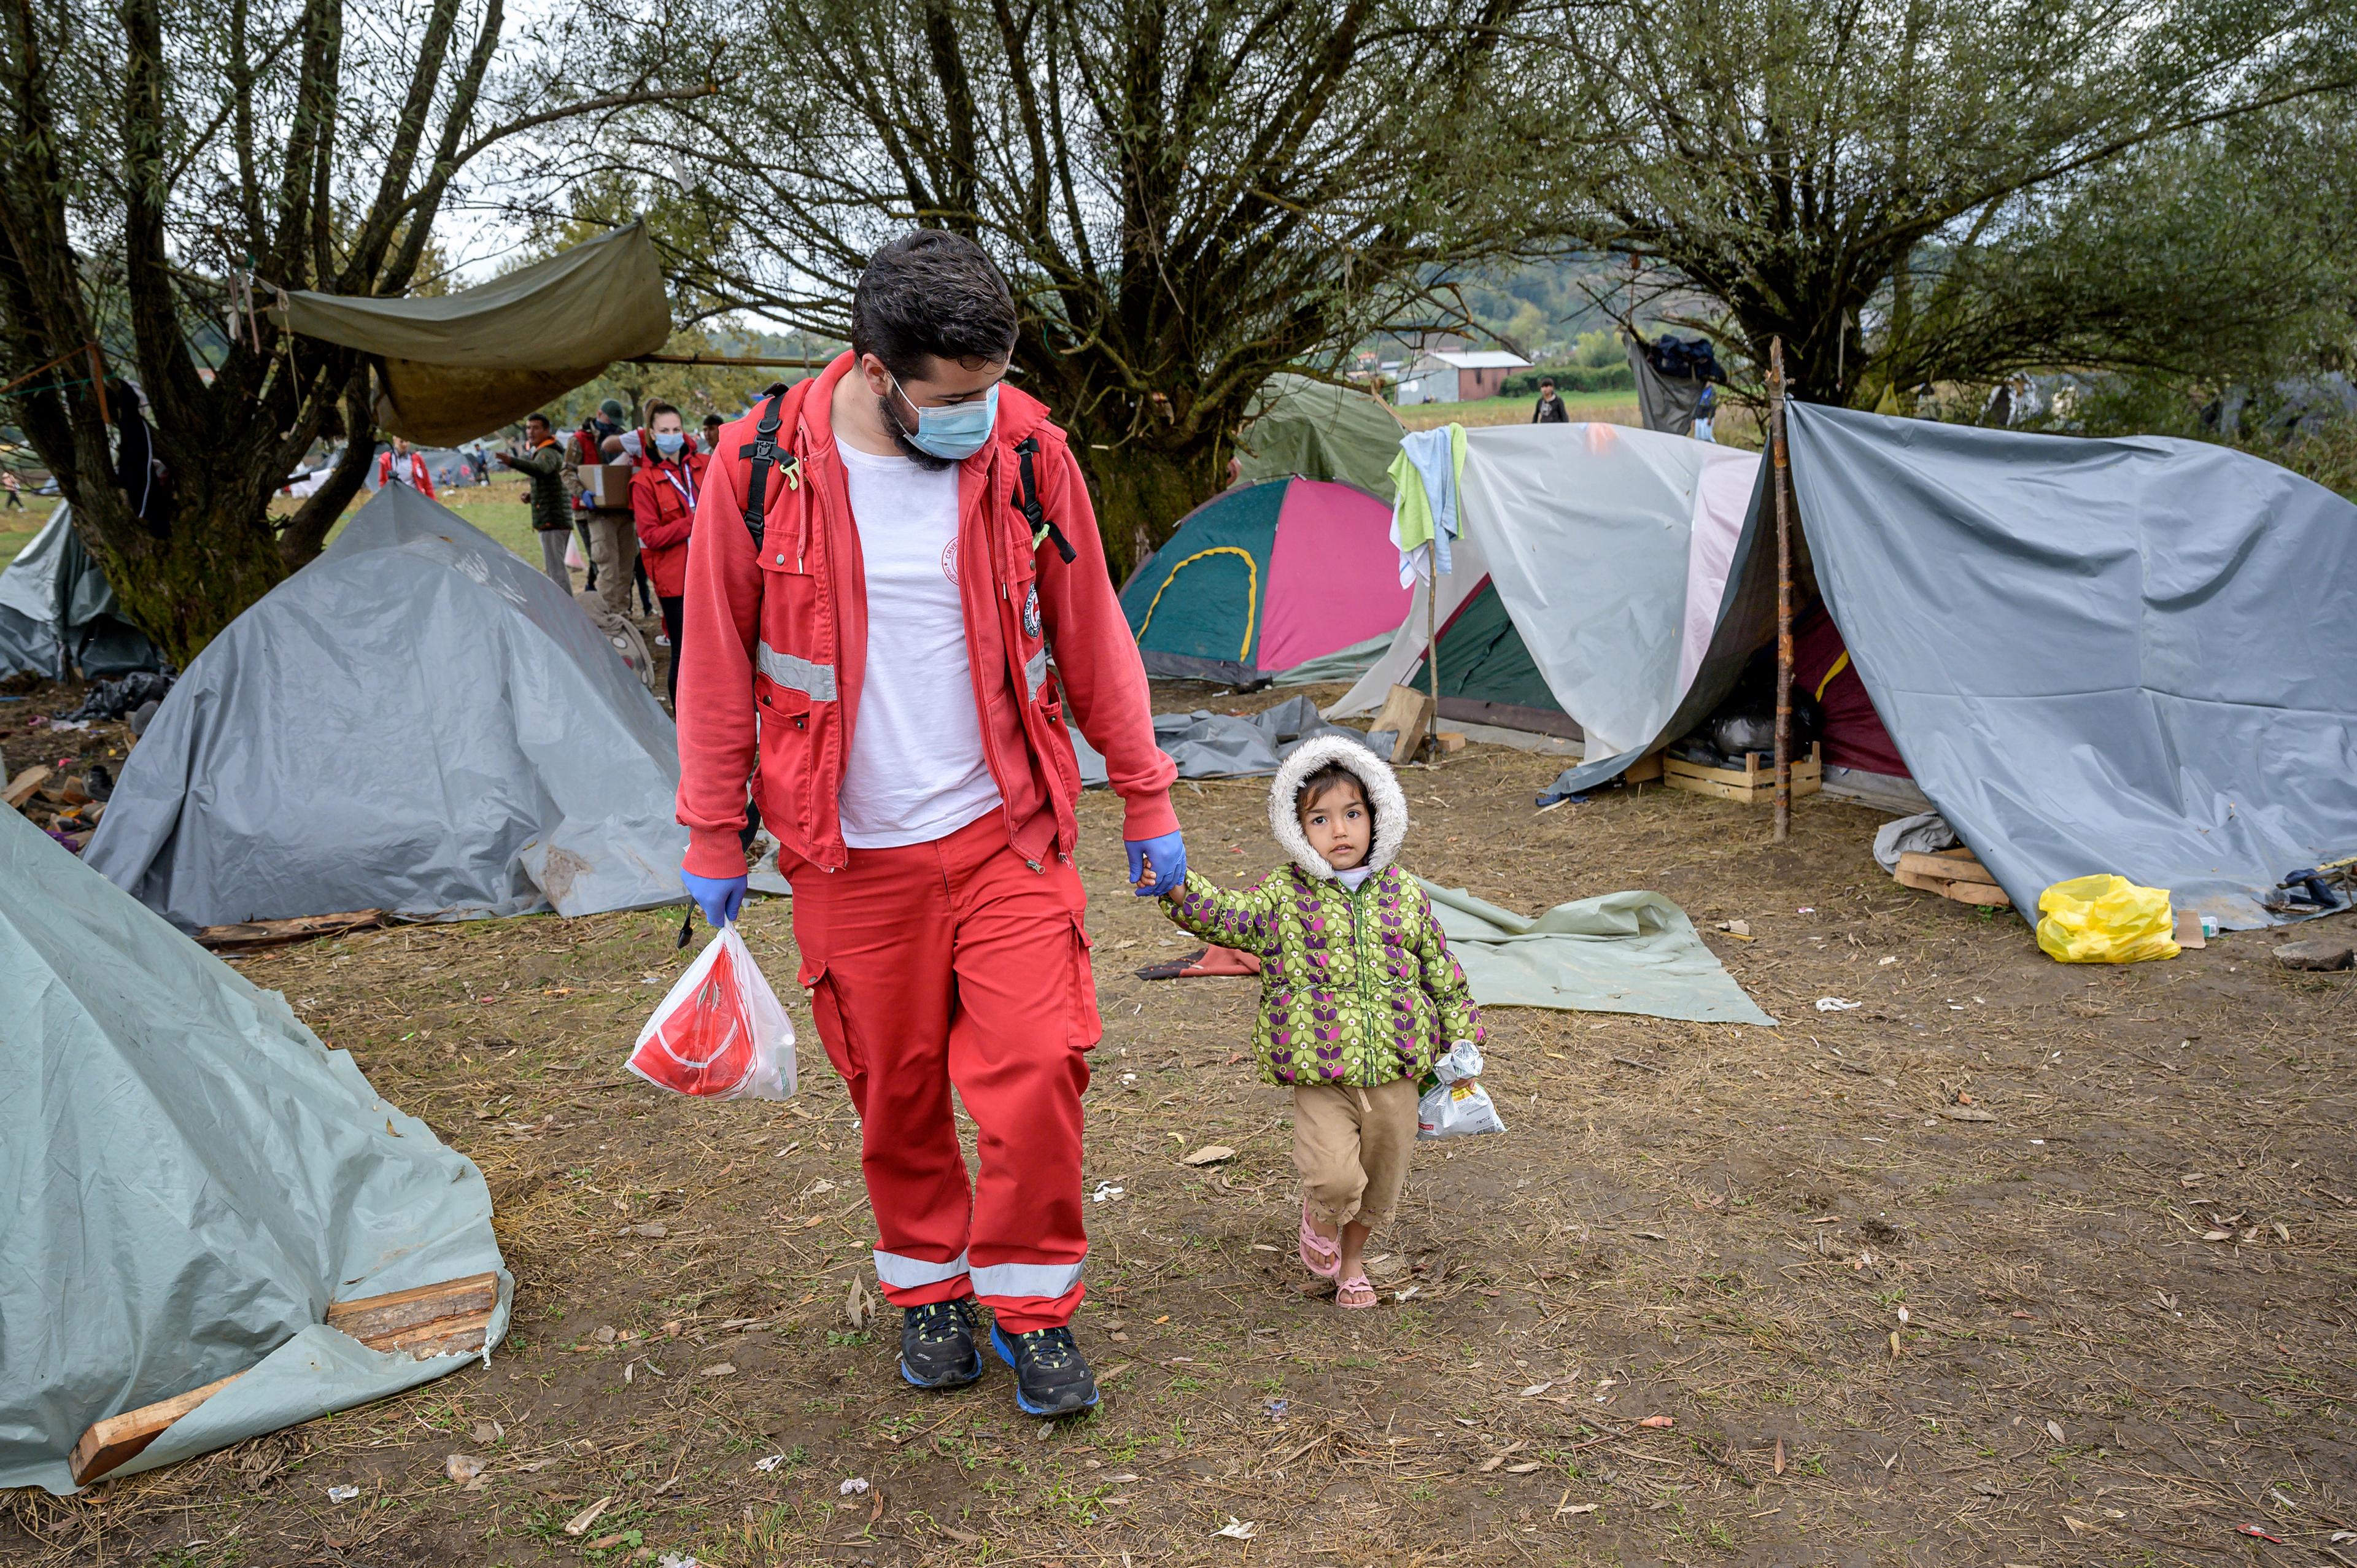 A man wearing red pants and a red jacket is holding a small child with his left hand. They walk together through tents, which are located on a green area. 